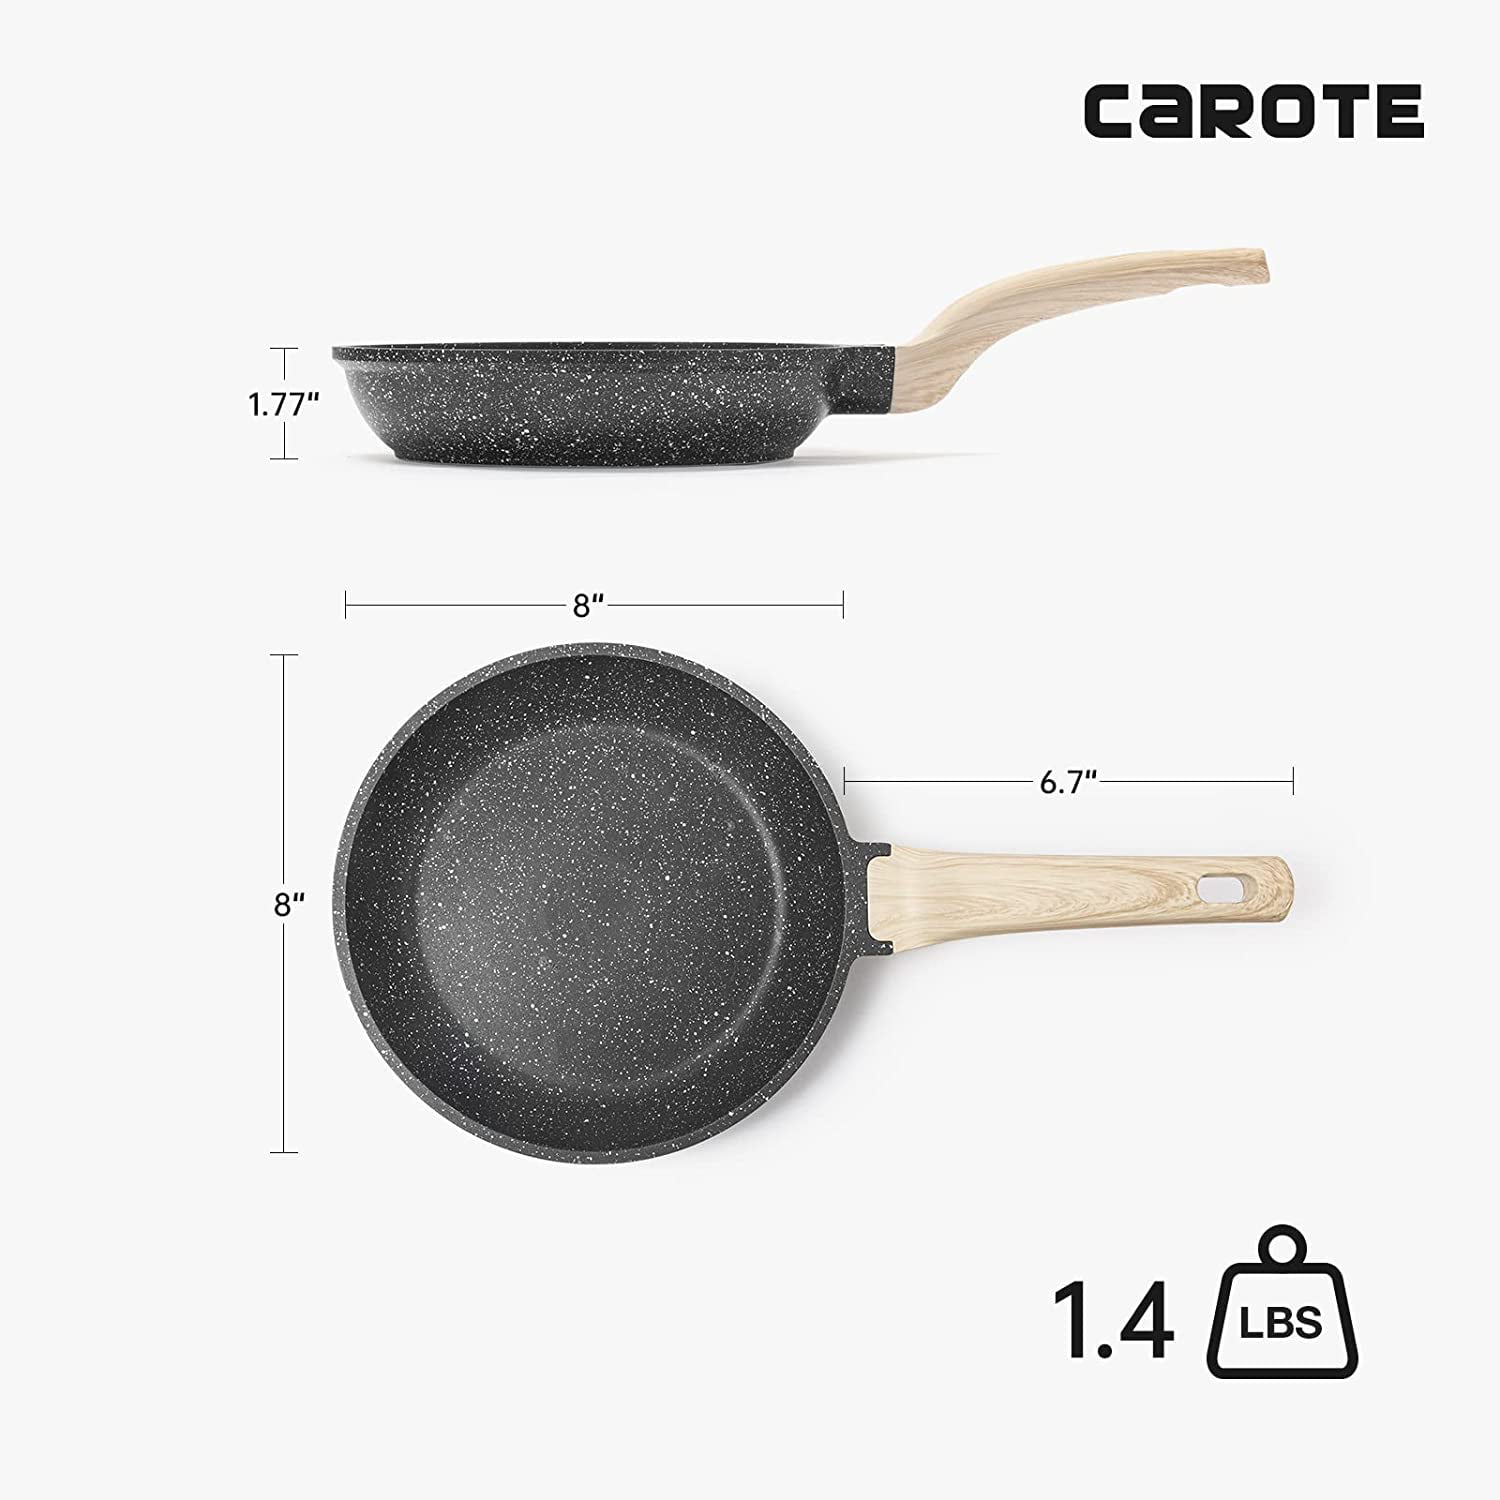 YBM Home OT8 Classic NonStick Frying Pan Skillet (PTFE and PFOA Free)  Non-Stick Teflon Coating Cookware with Riveted Handle, Scratch Resistant  and